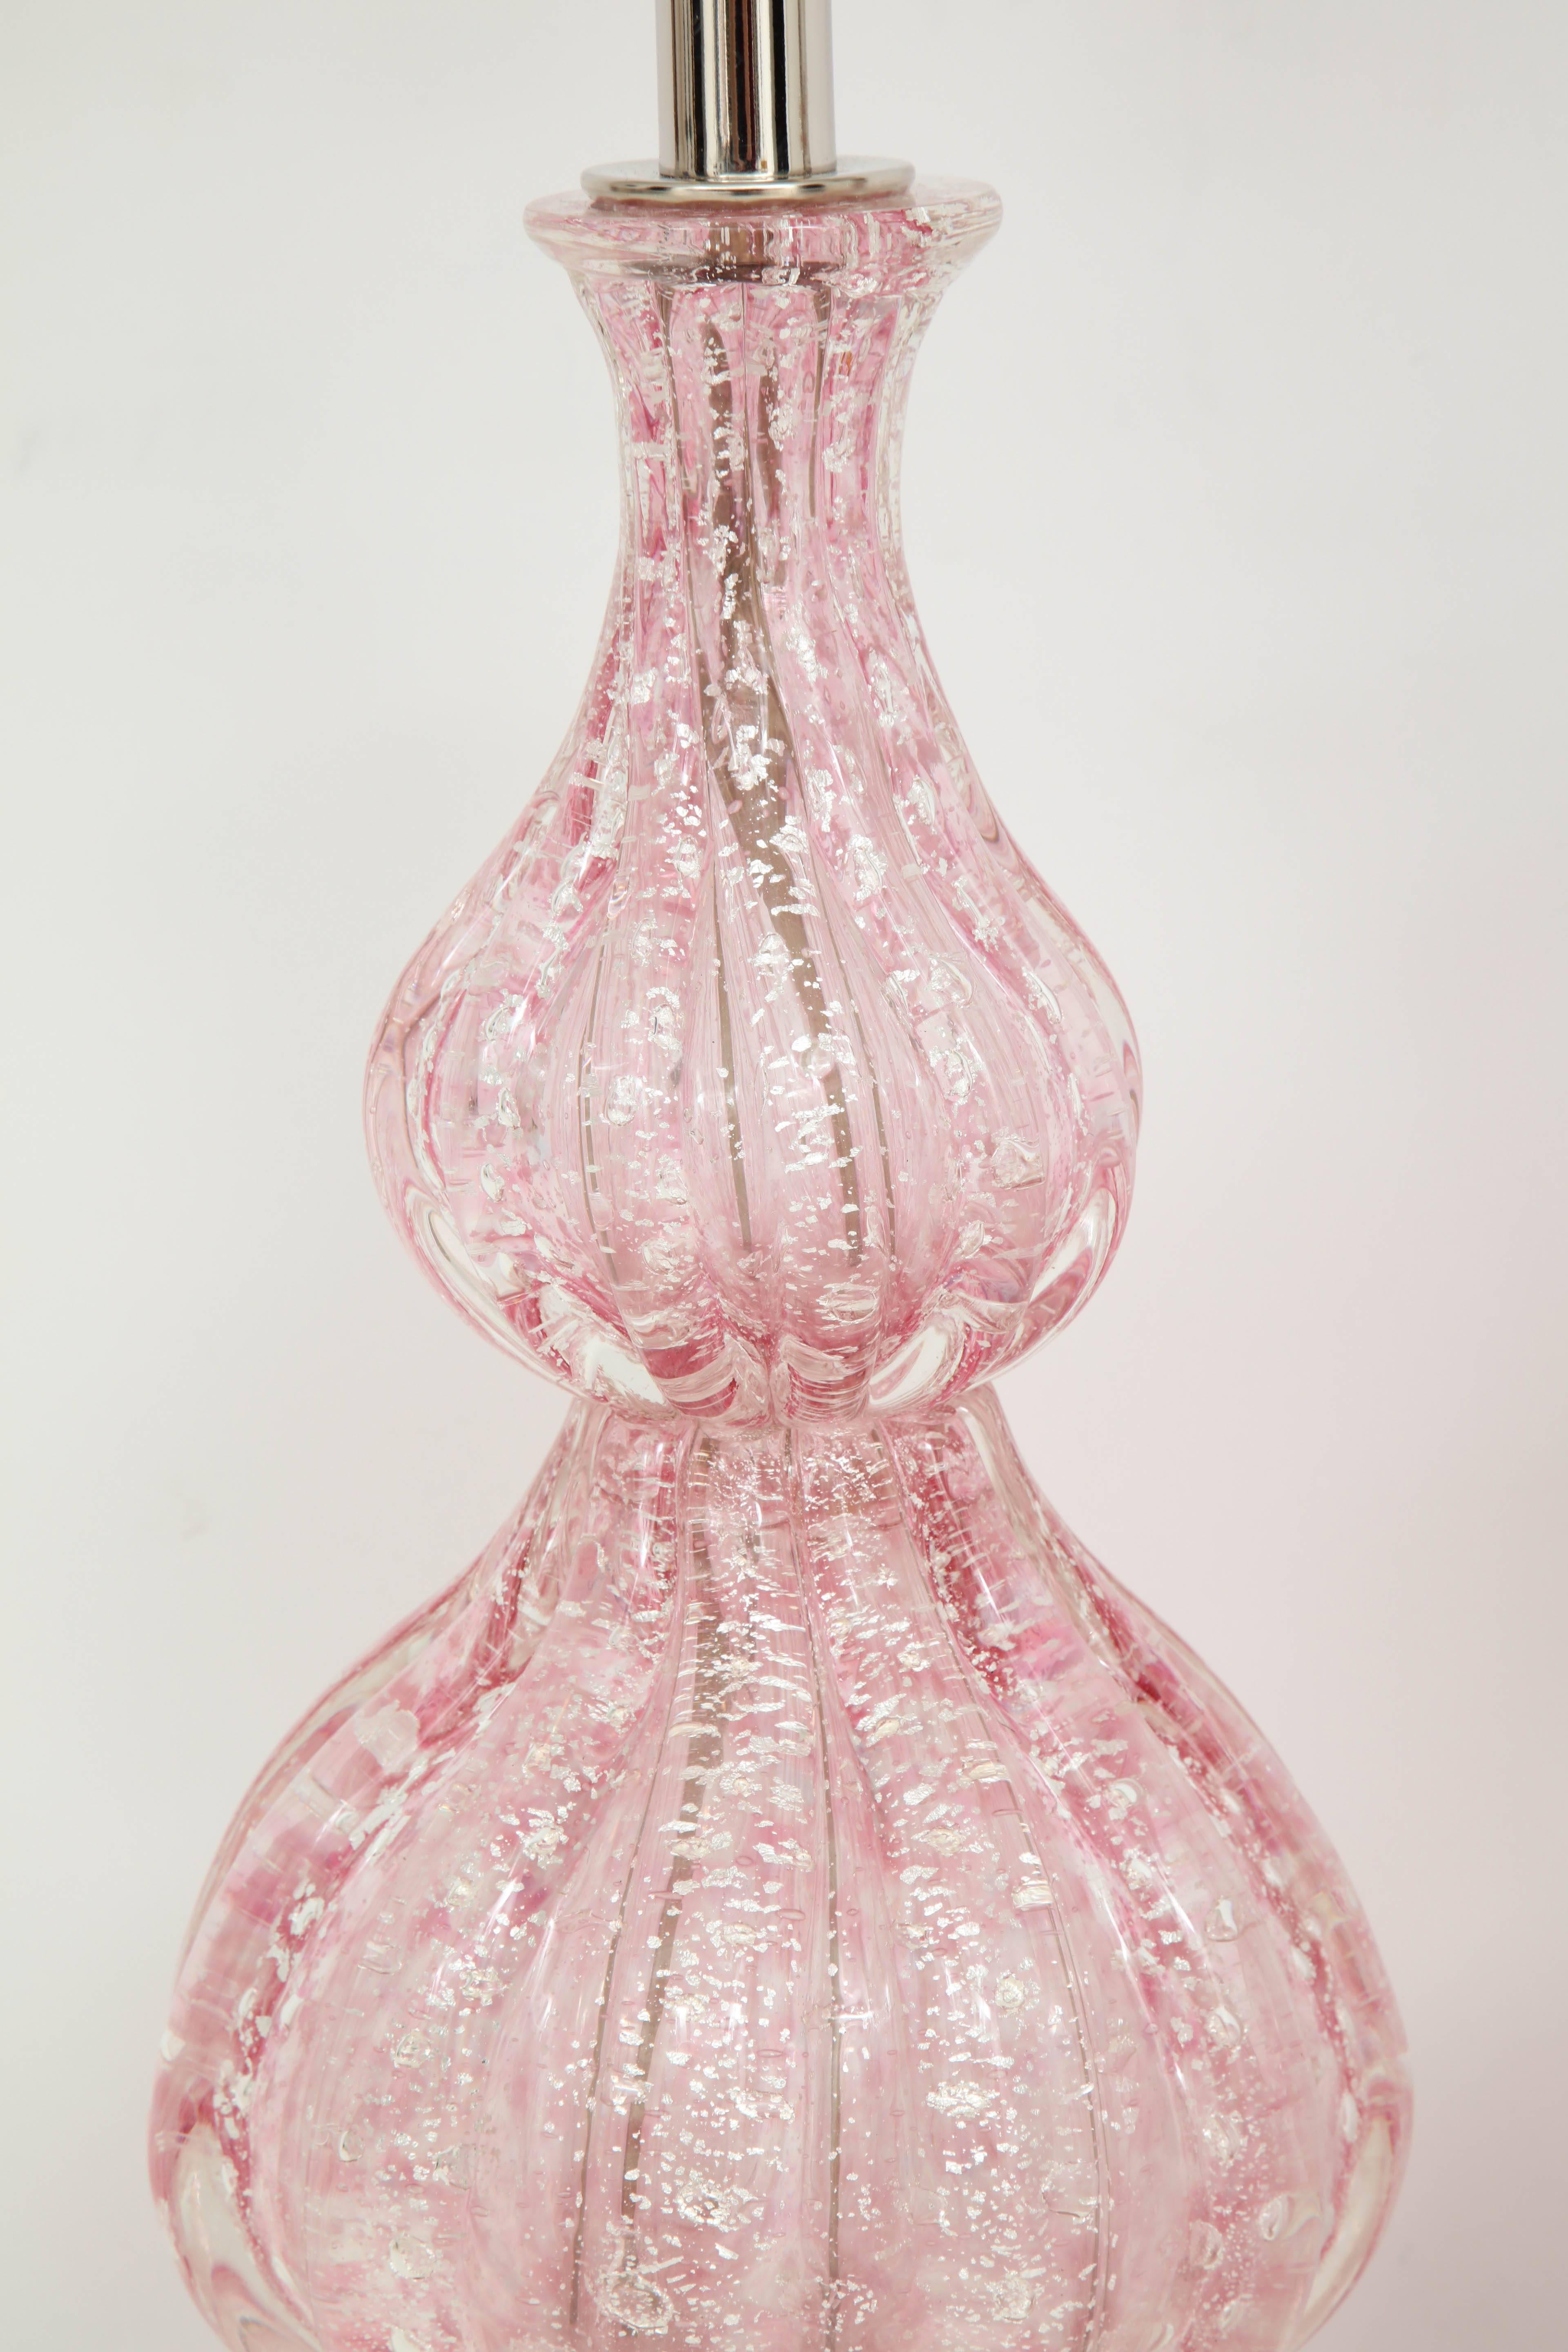 Mid-20th Century Large Pair of  Pink Barovier Lamps